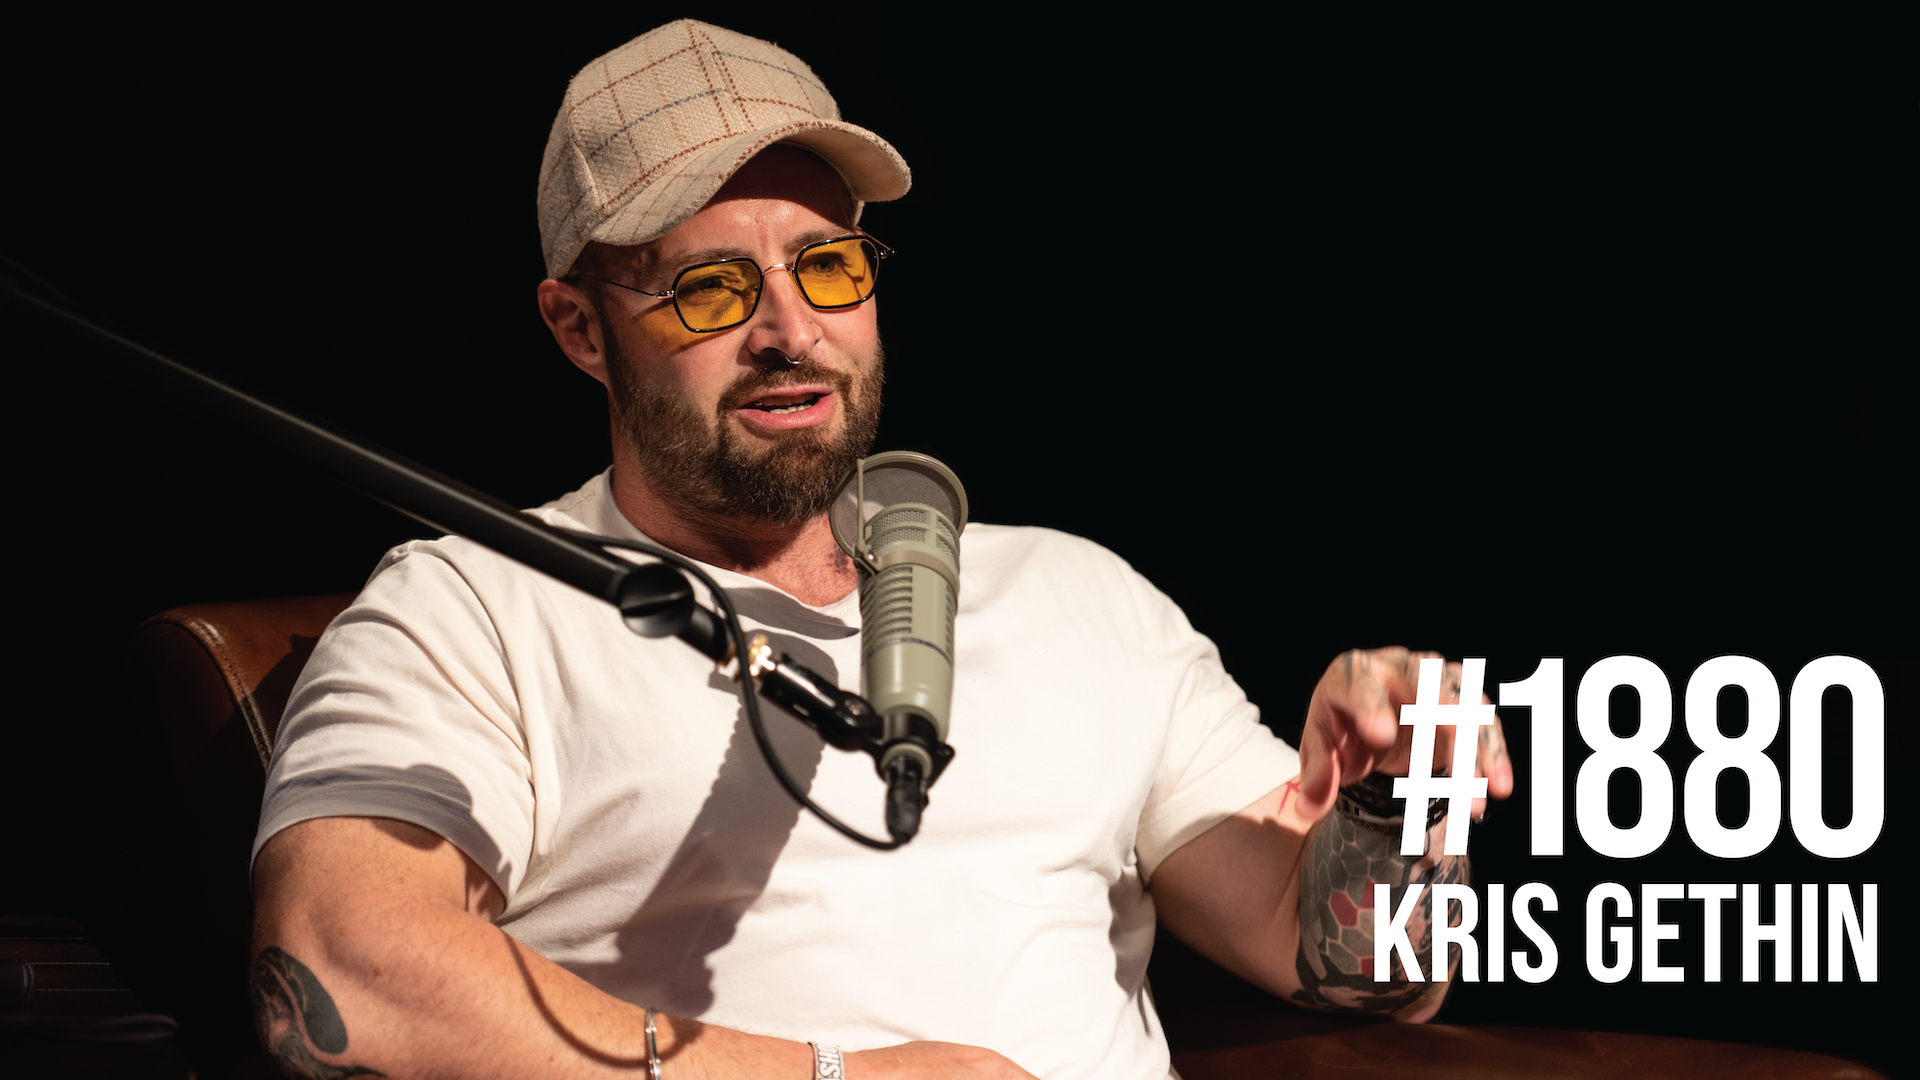 1880: The Value of Bodybuilding Knowledge With Kris Gethin